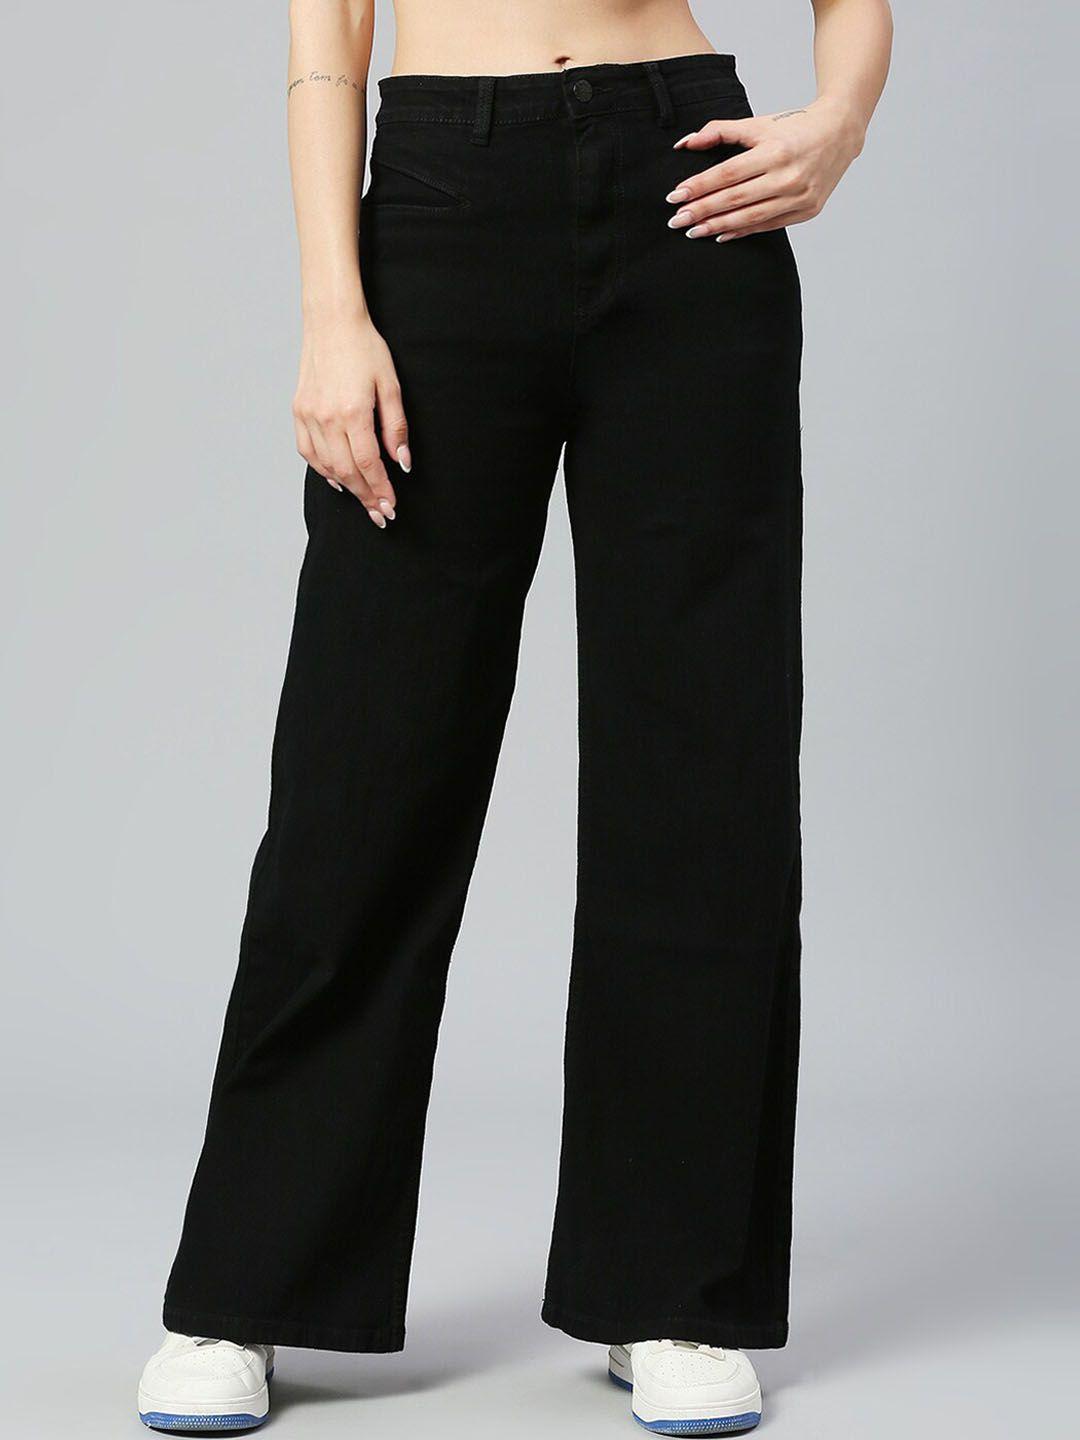 hj-hasasi-women-high-rise-stretchable-wide-leg-jeans